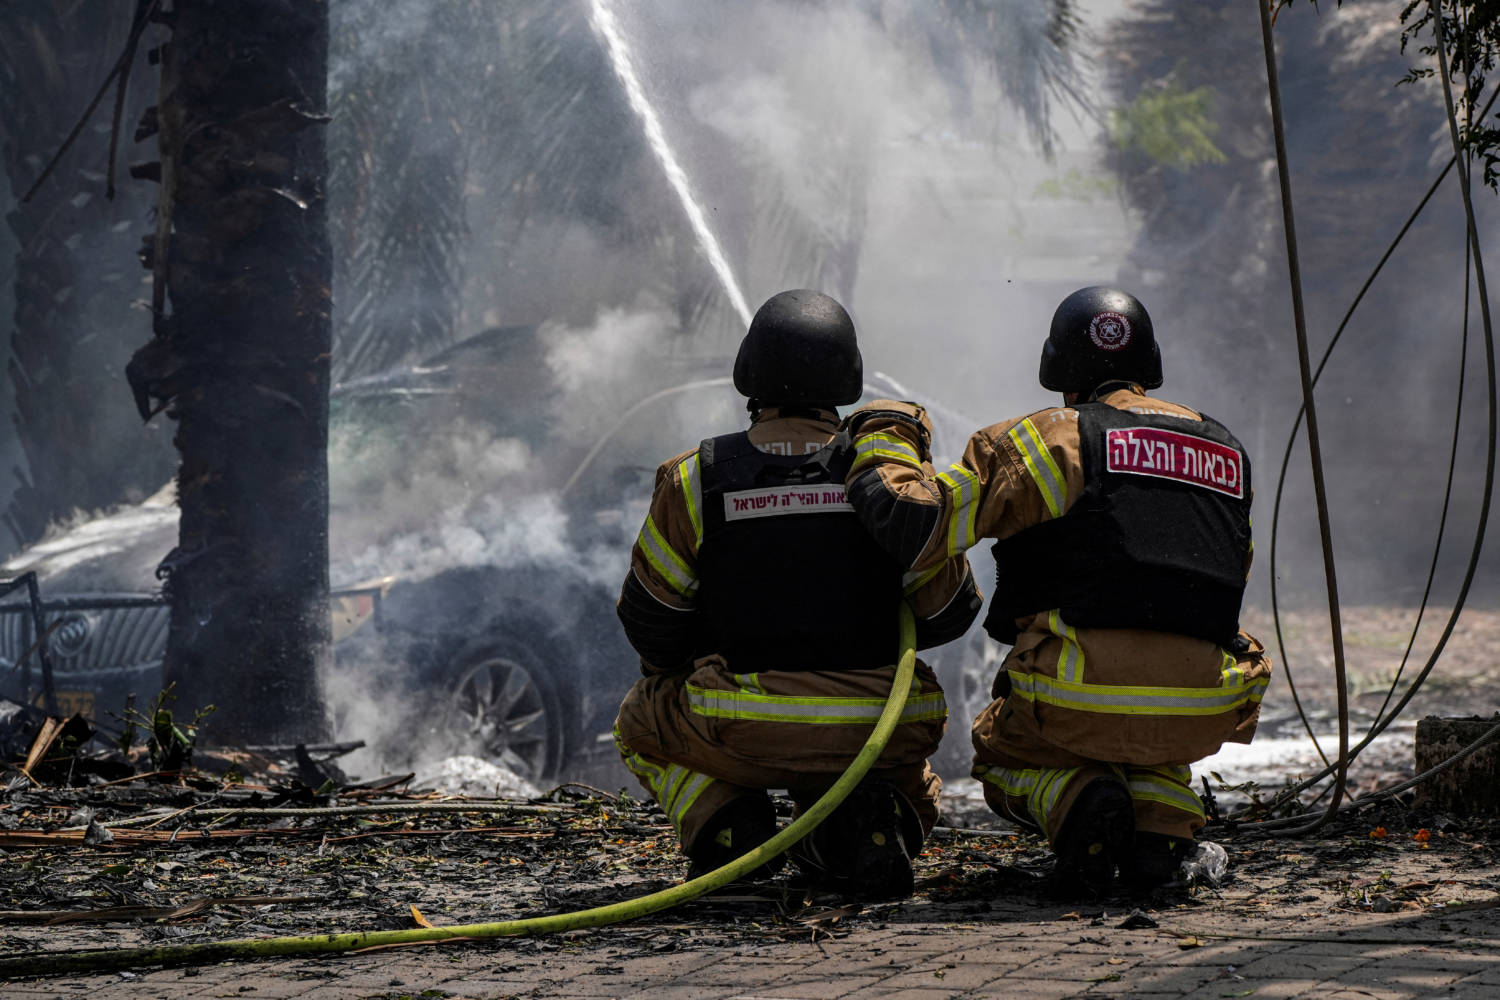 Firefighters Work To Put Out A Fire At The Impact Site Of A Rocket That Was Fired Towards Israel From Lebanon, Amid Ongoing Cross Border Hostilities Between Hezbollah And Israeli Forces, In Kiryat Shmona